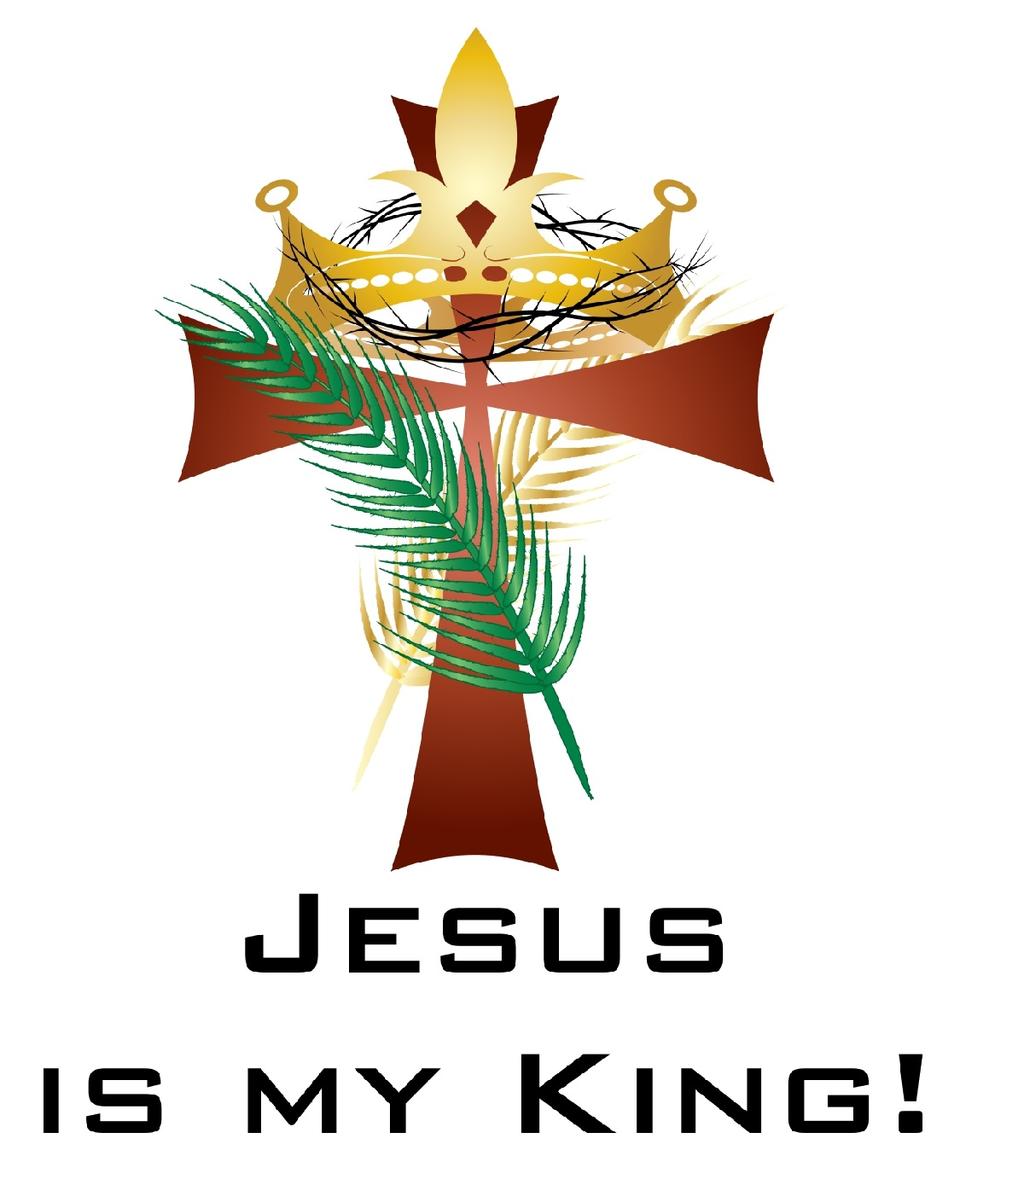 Hosanna To The King Text: Selected Scriptures Series: The Blood Of Christ, #3 Pastor Lyle L. Wahl April 09, 2017 Theme: The Blood Of Christ Calls Us To Make Jesus King Every Day.